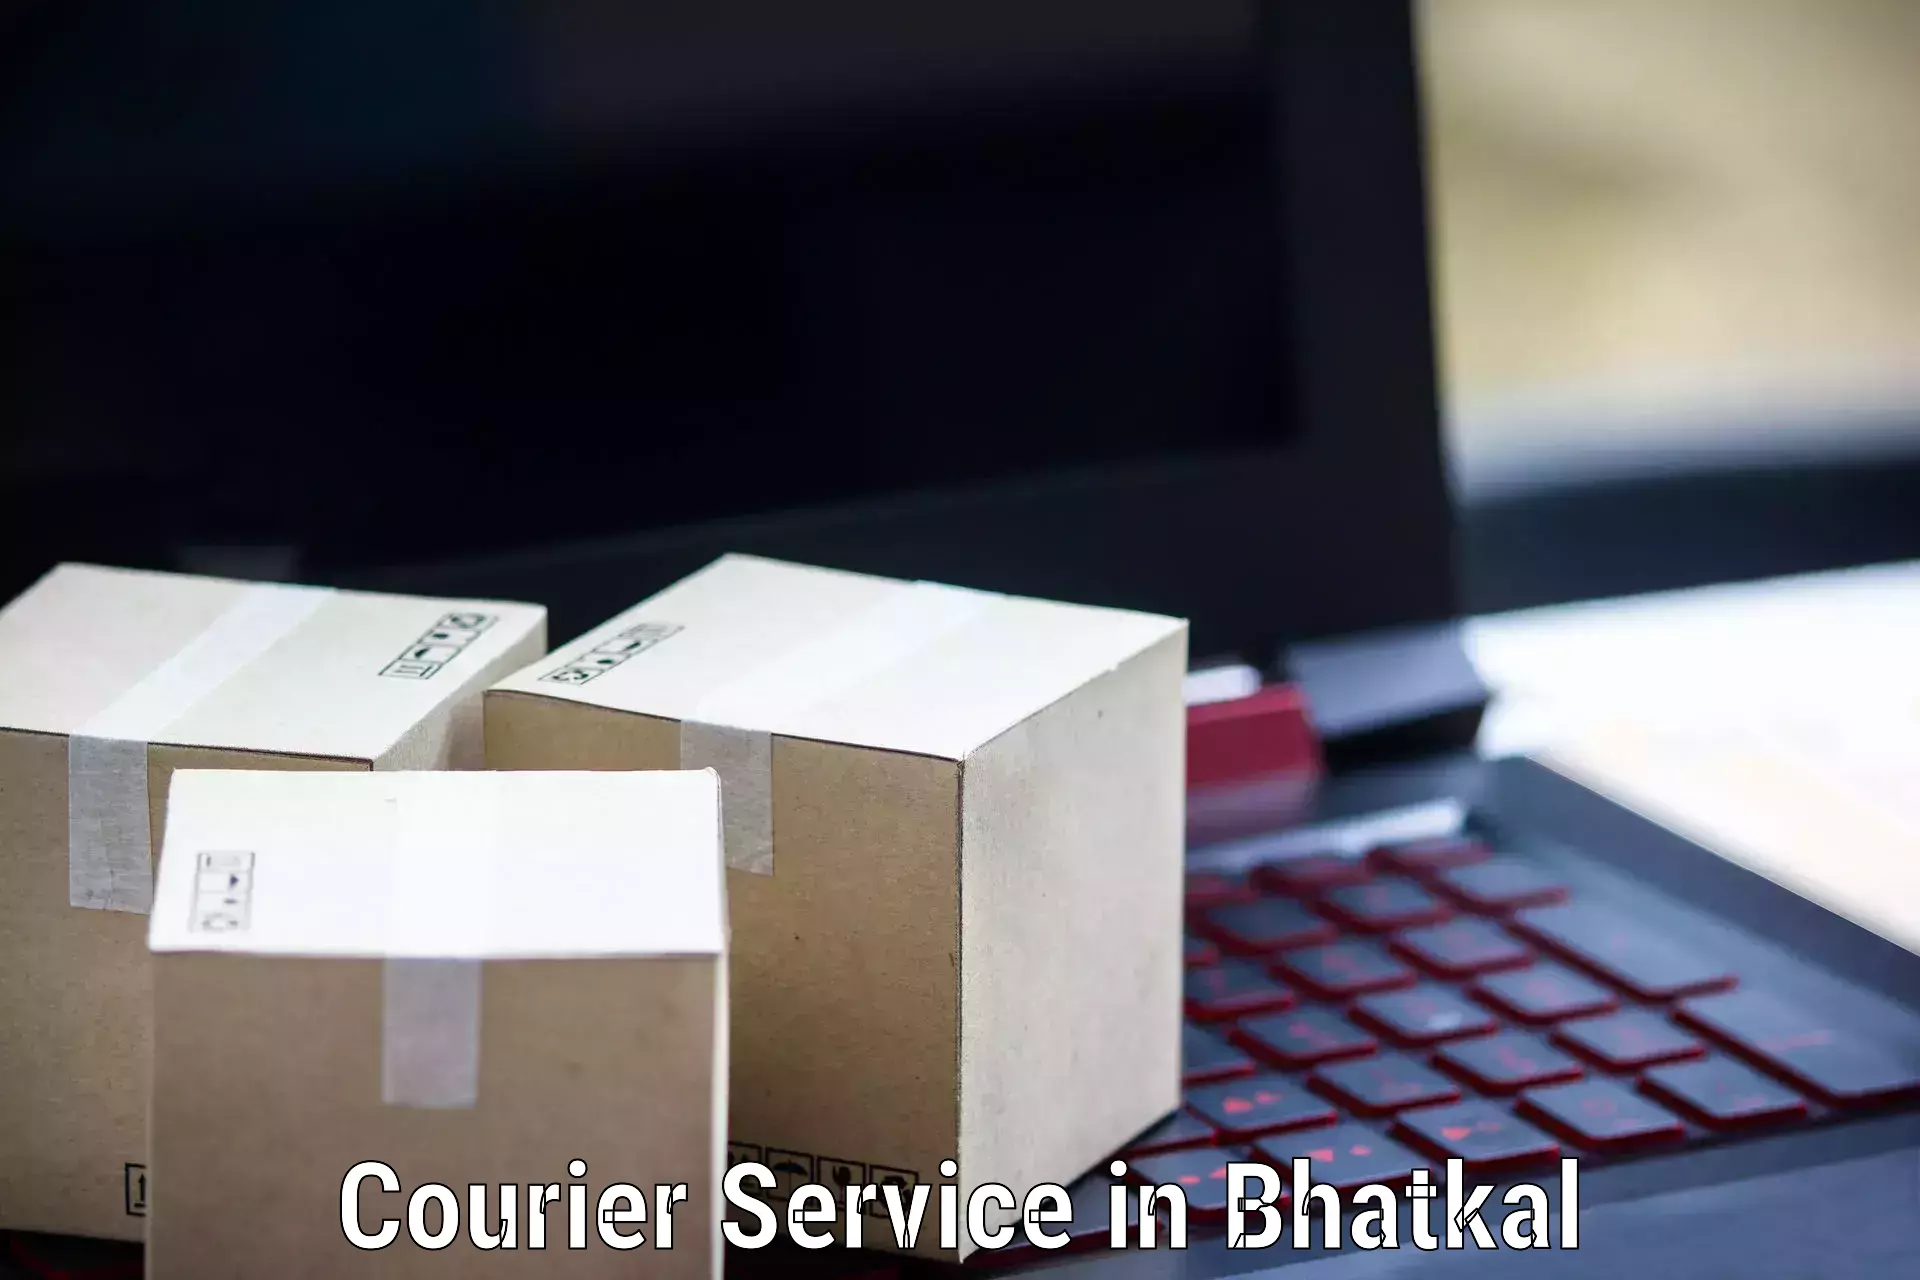 Global delivery options in Bhatkal